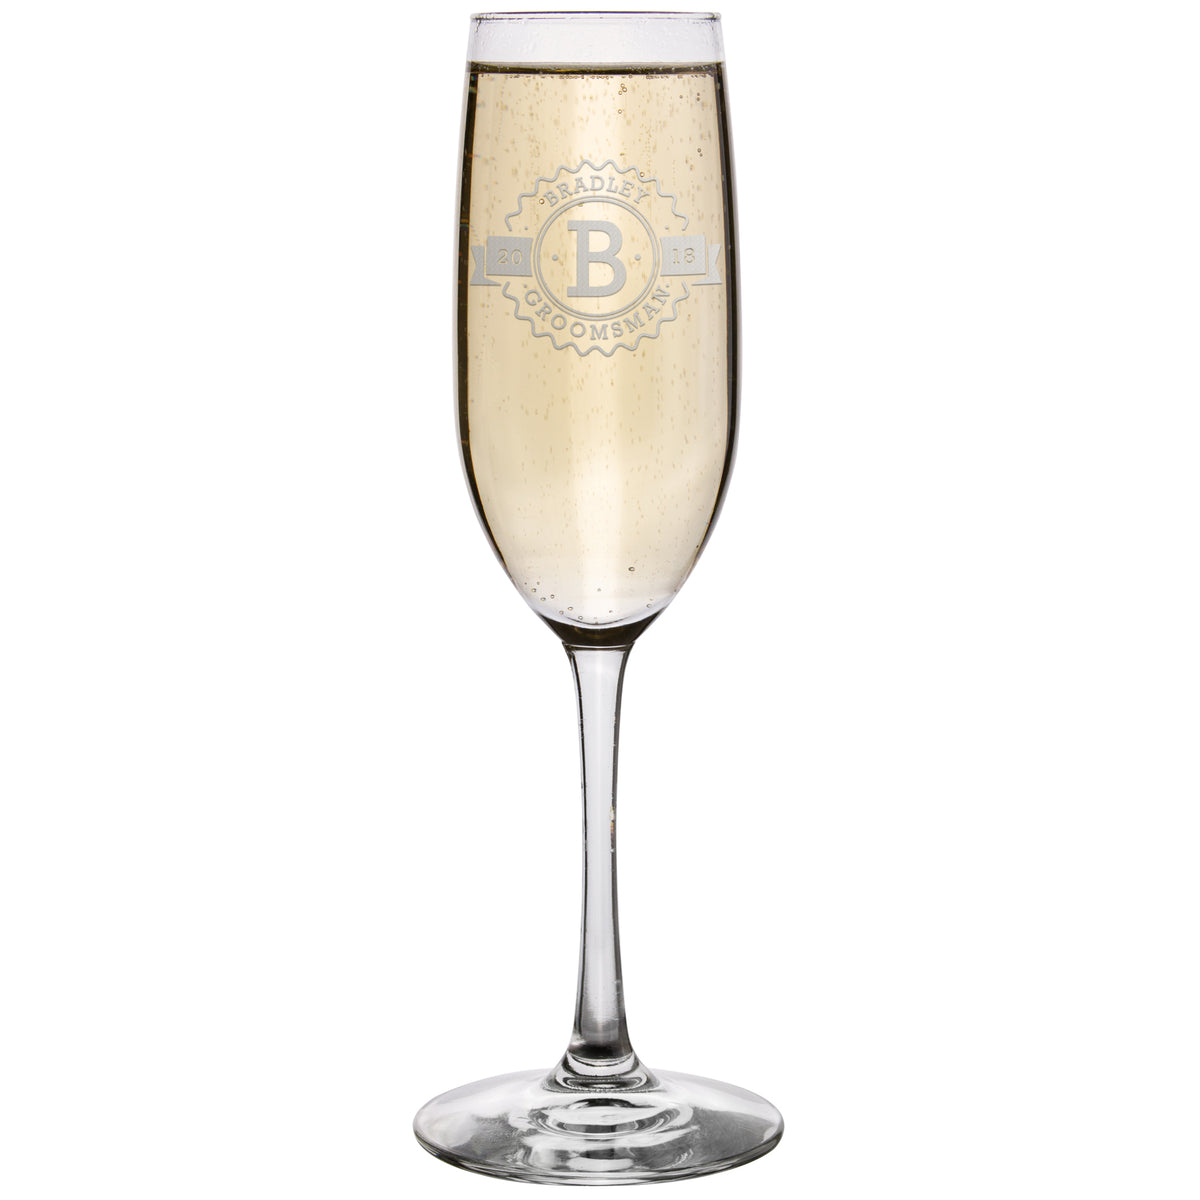 Bride & Groom Champagne Glass Set - Design: HH6 - Everything Etched